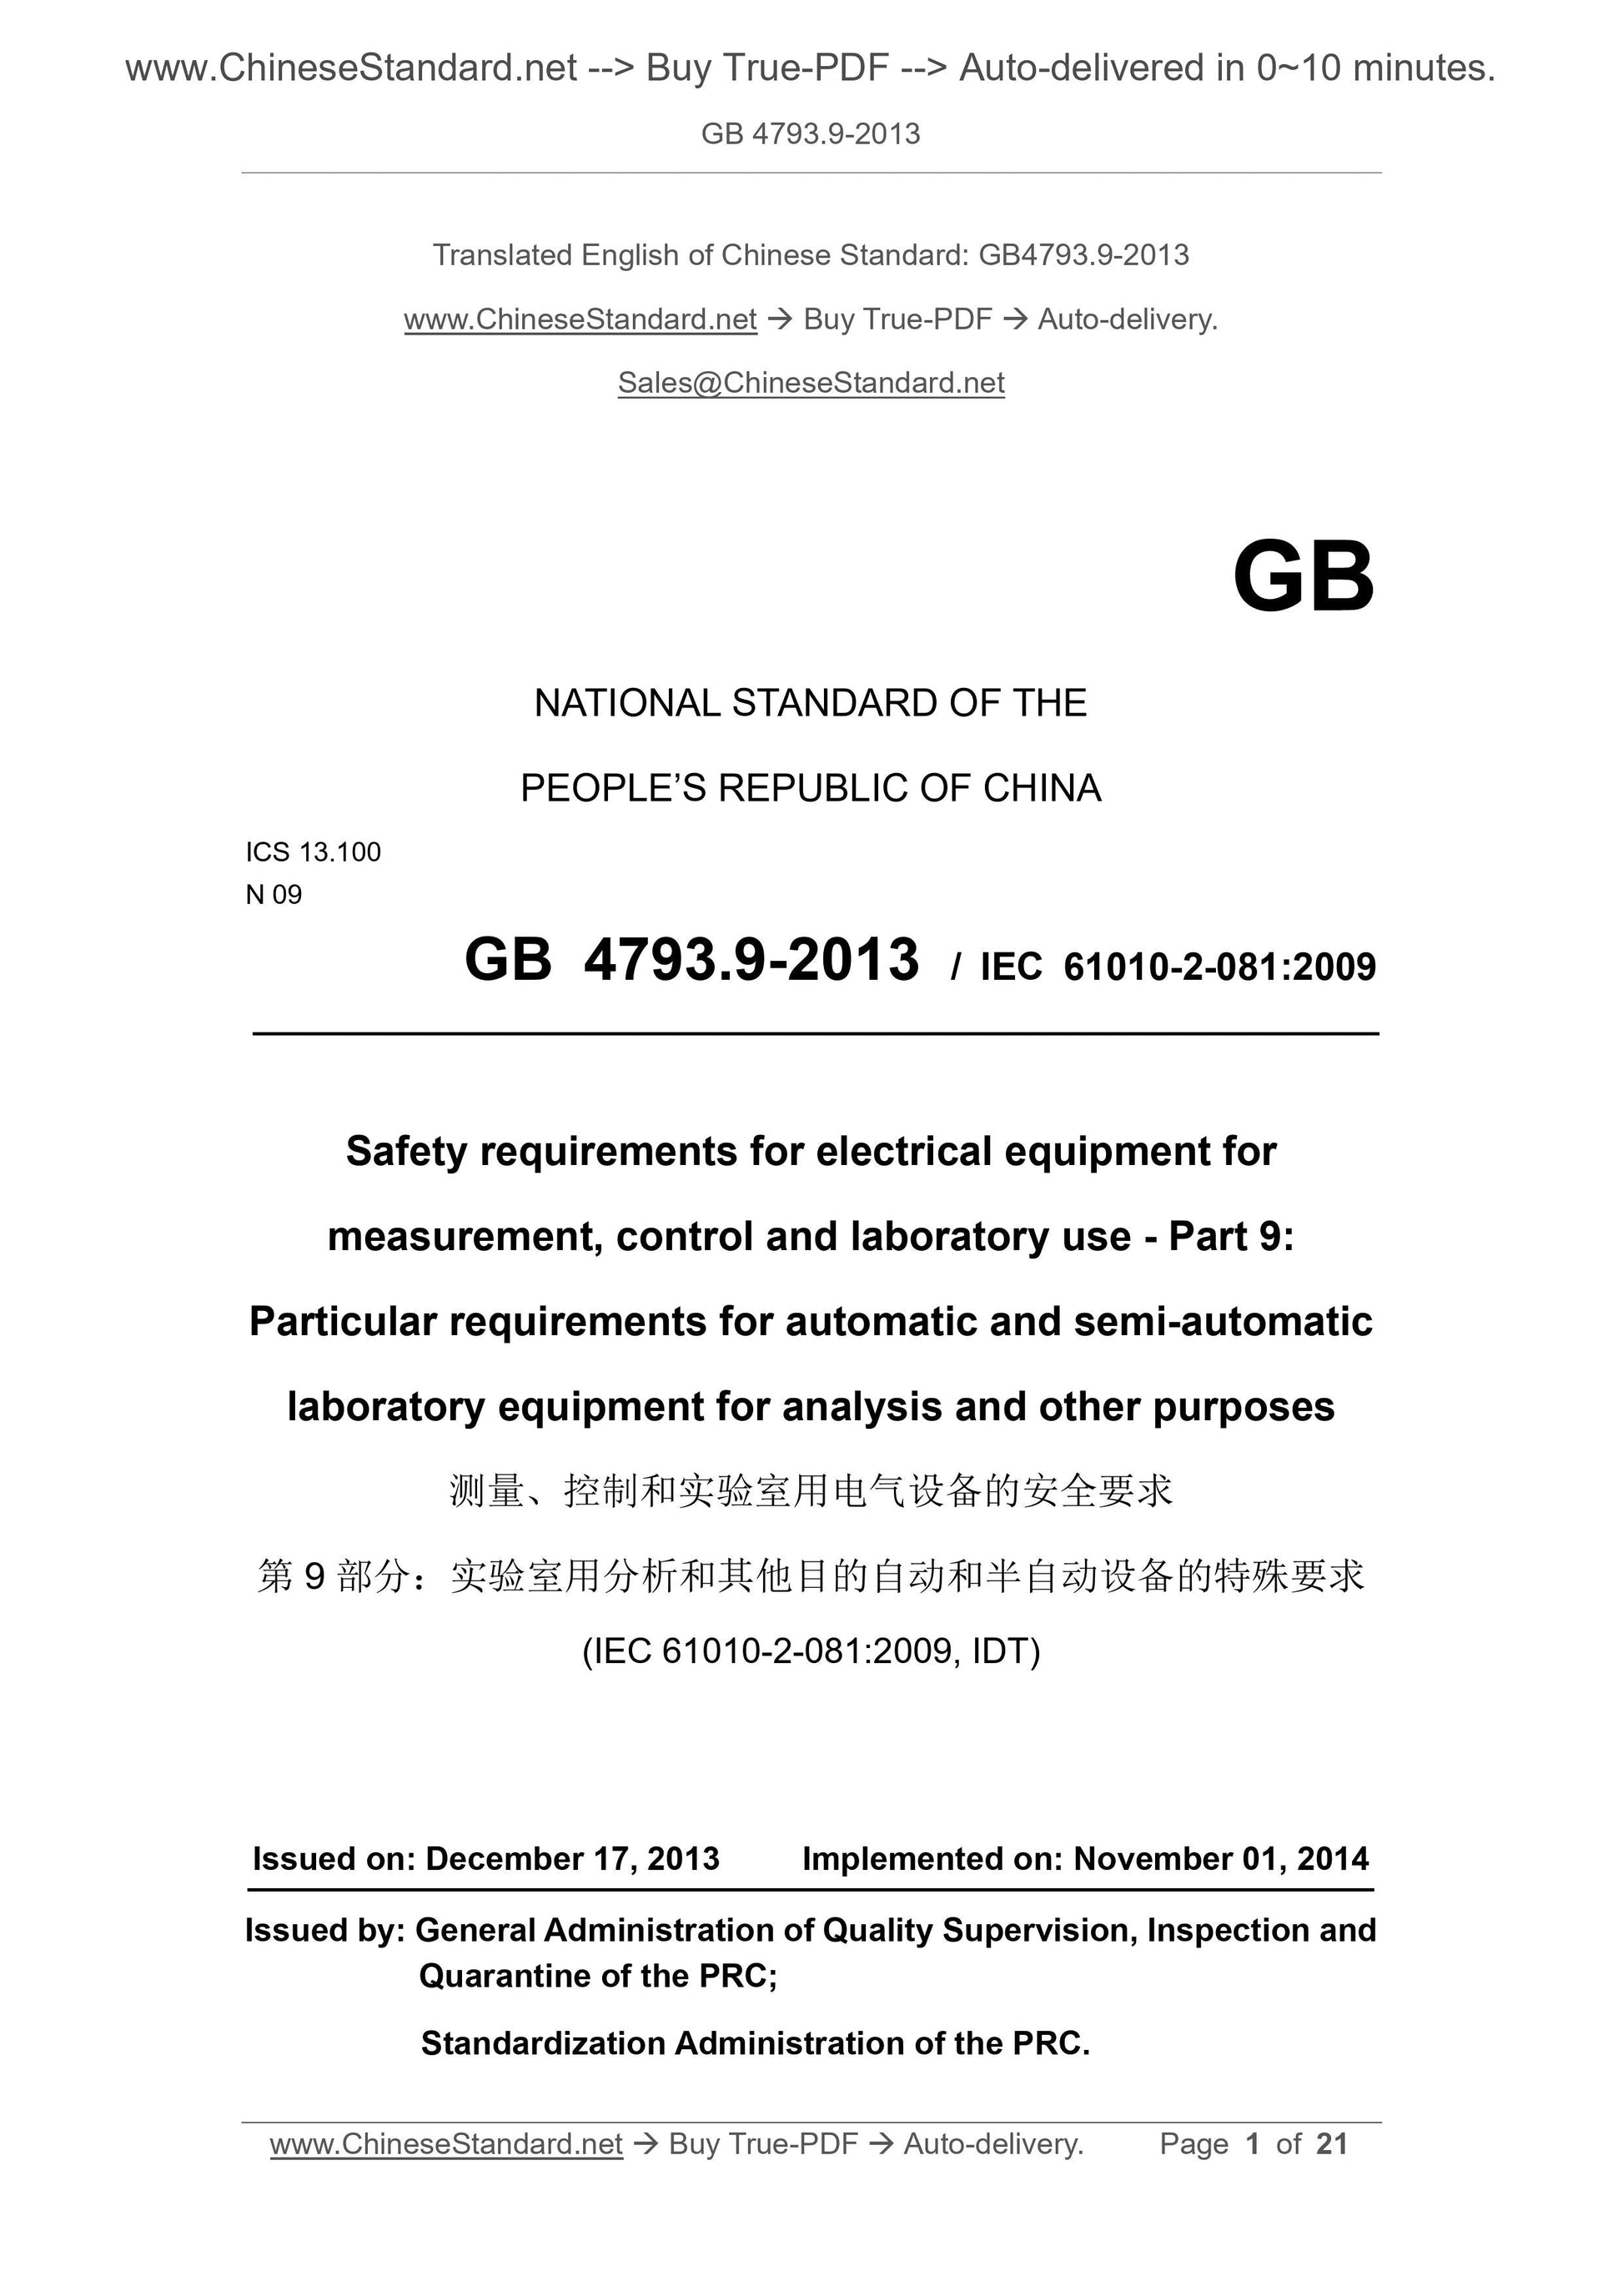 GB 4793.9-2013 Page 1